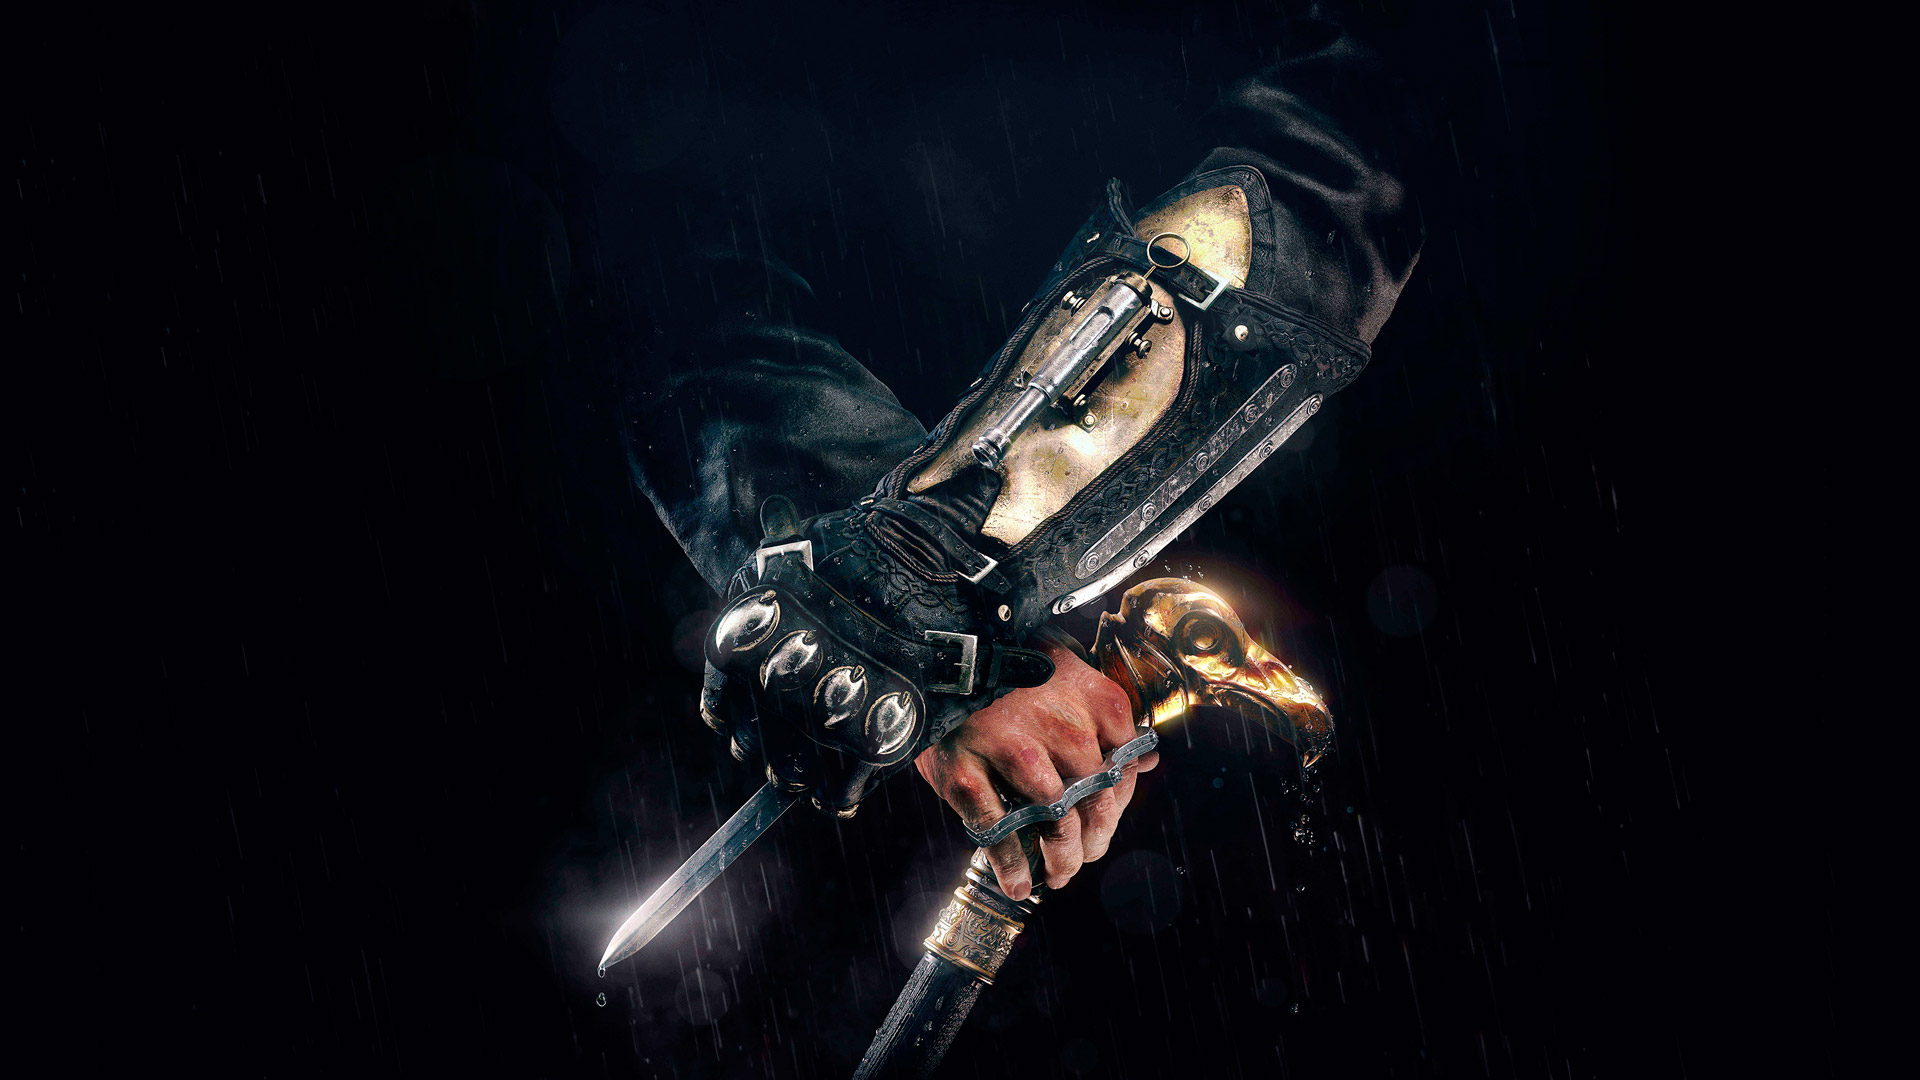 Assassins Creed Syndicate Wallpaper in 1920x1080 1920x1080